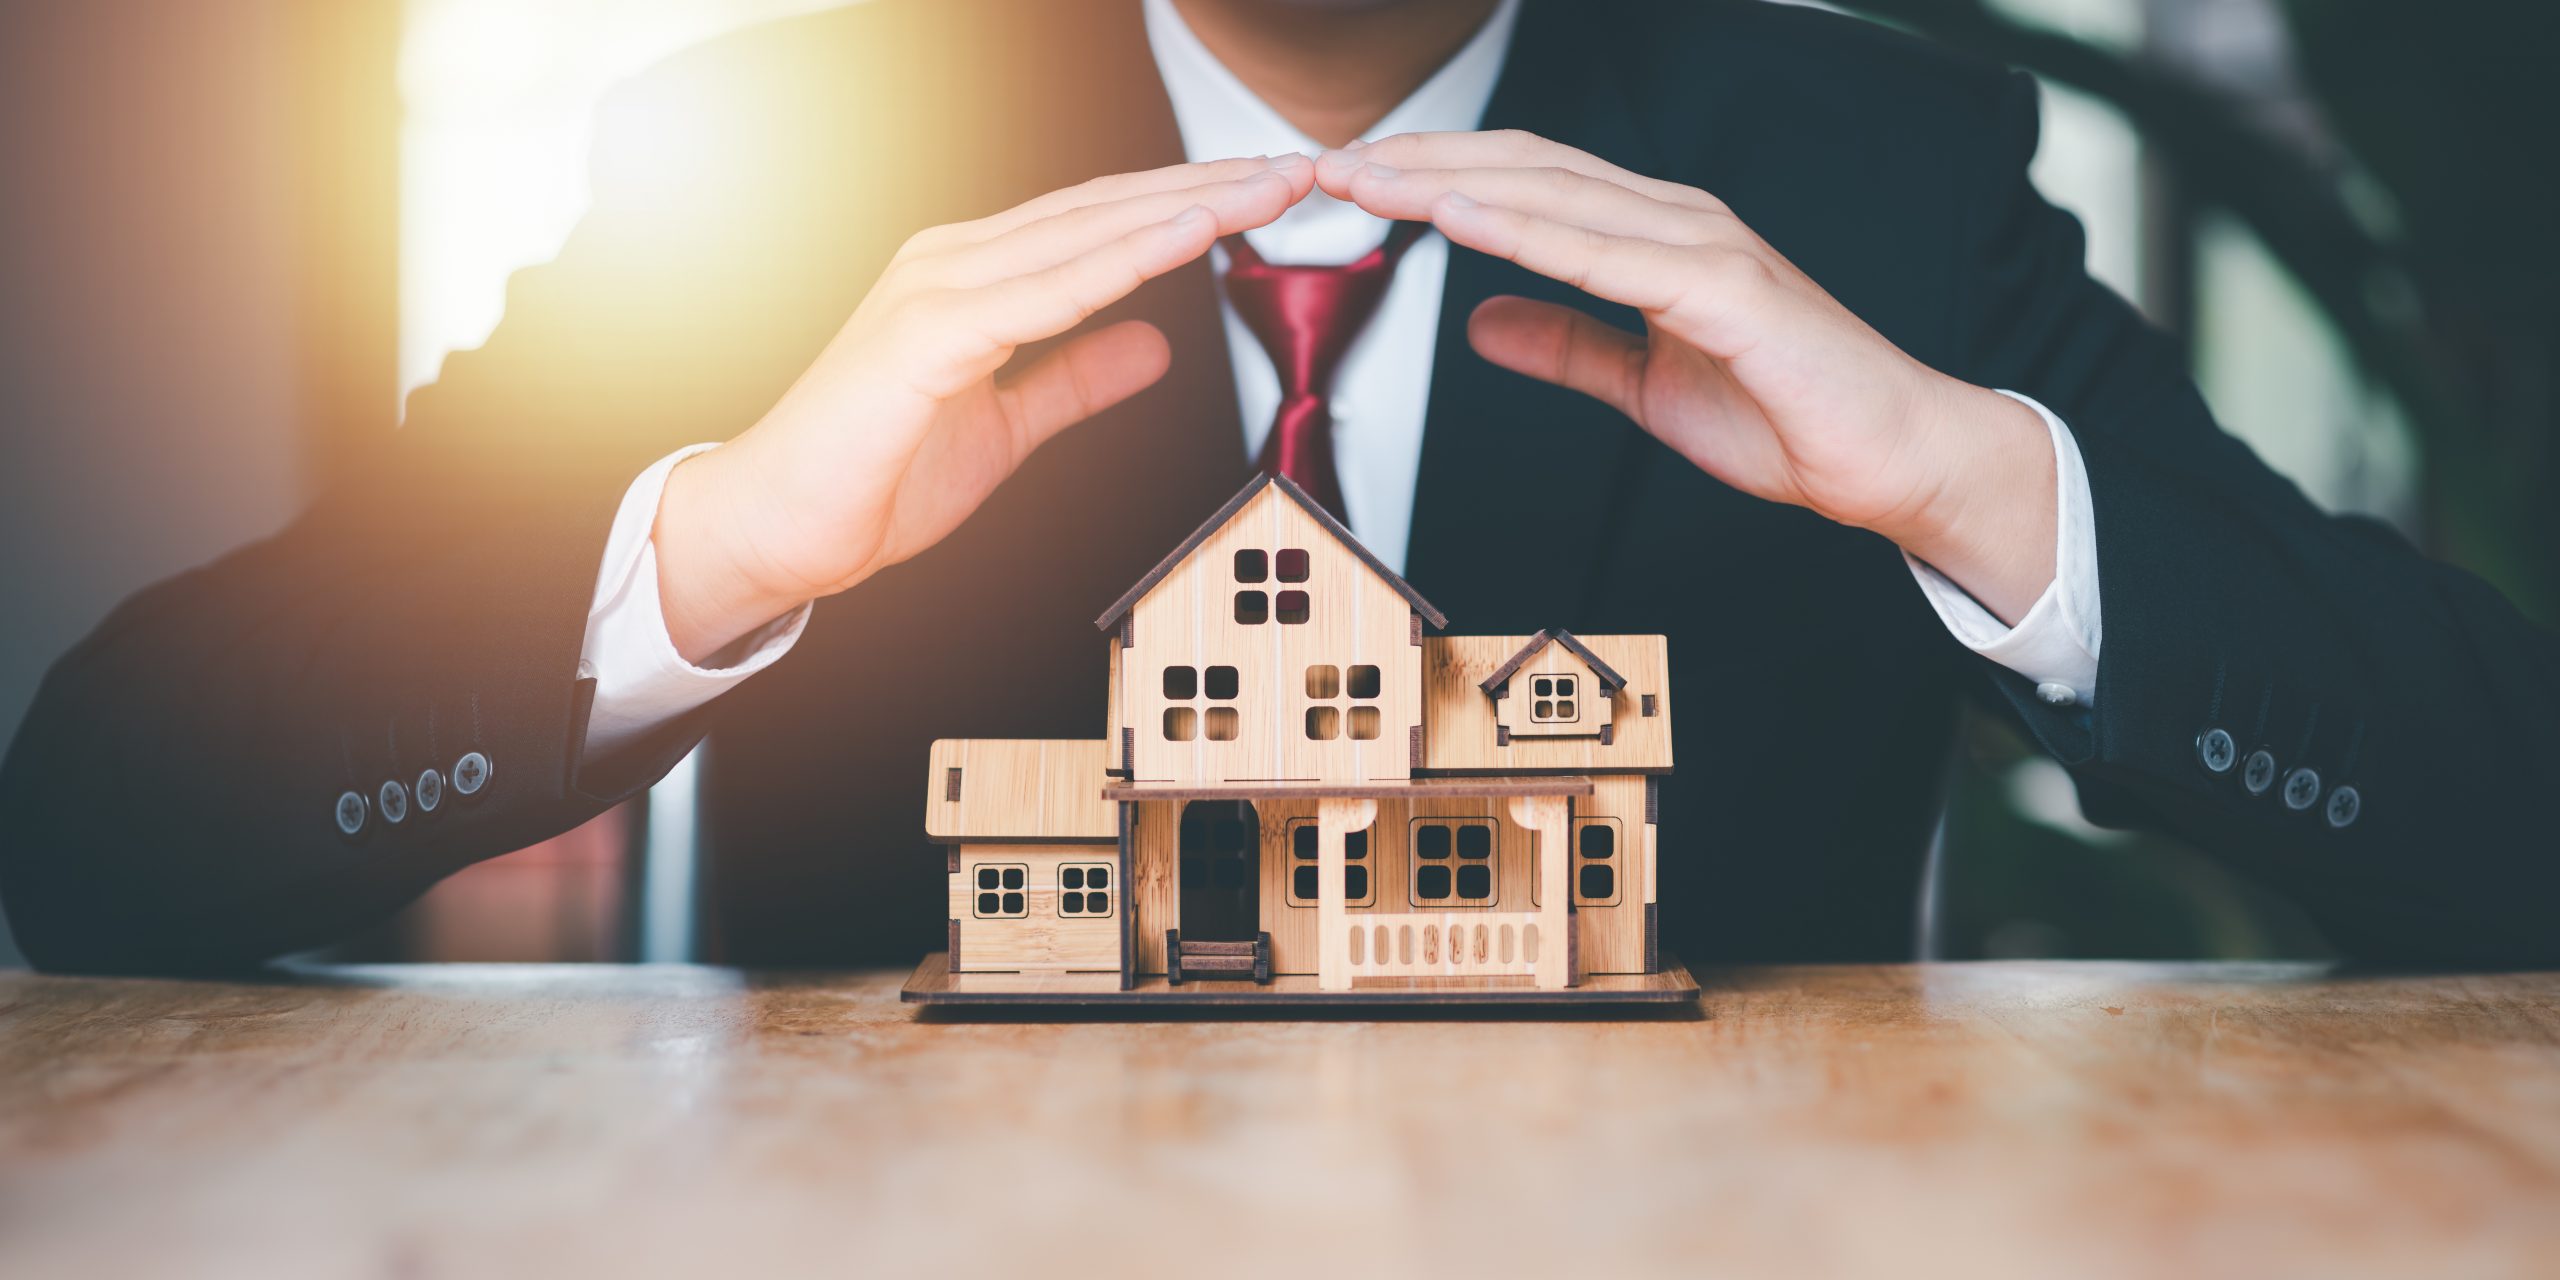 A professional in a suit making a protective gesture over a wooden house model, symbolizing insurance, security, or real estate services, specifically focusing on First Party Property Claims.